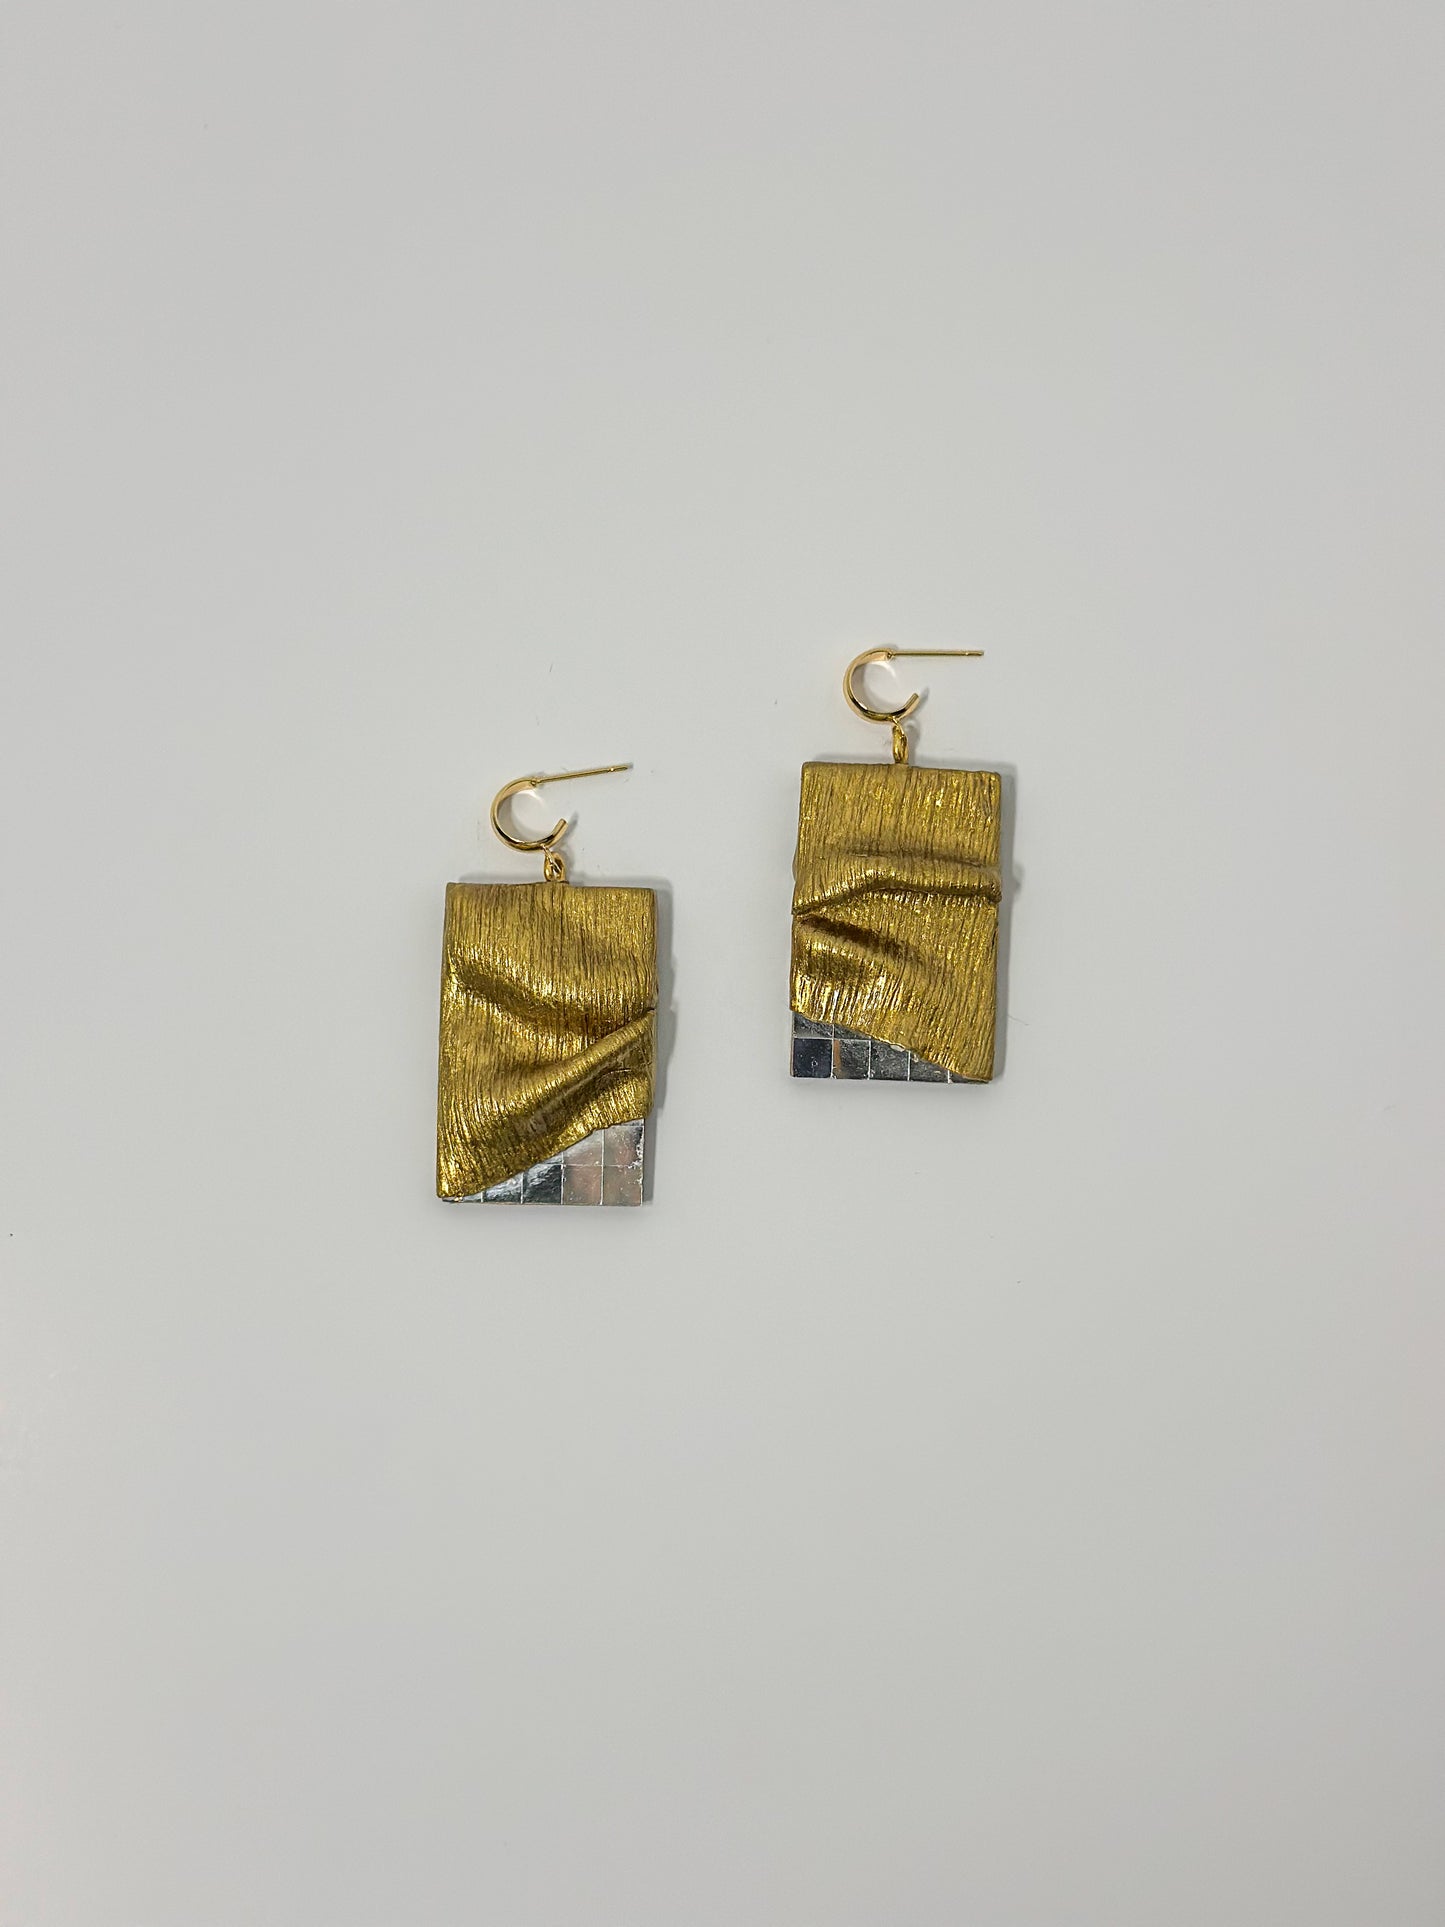 Top View: Crafted from gold clay, these hypoallergenic earrings feature intricate sculpting and textured detailing, draping elegantly over glass mirror pieces.